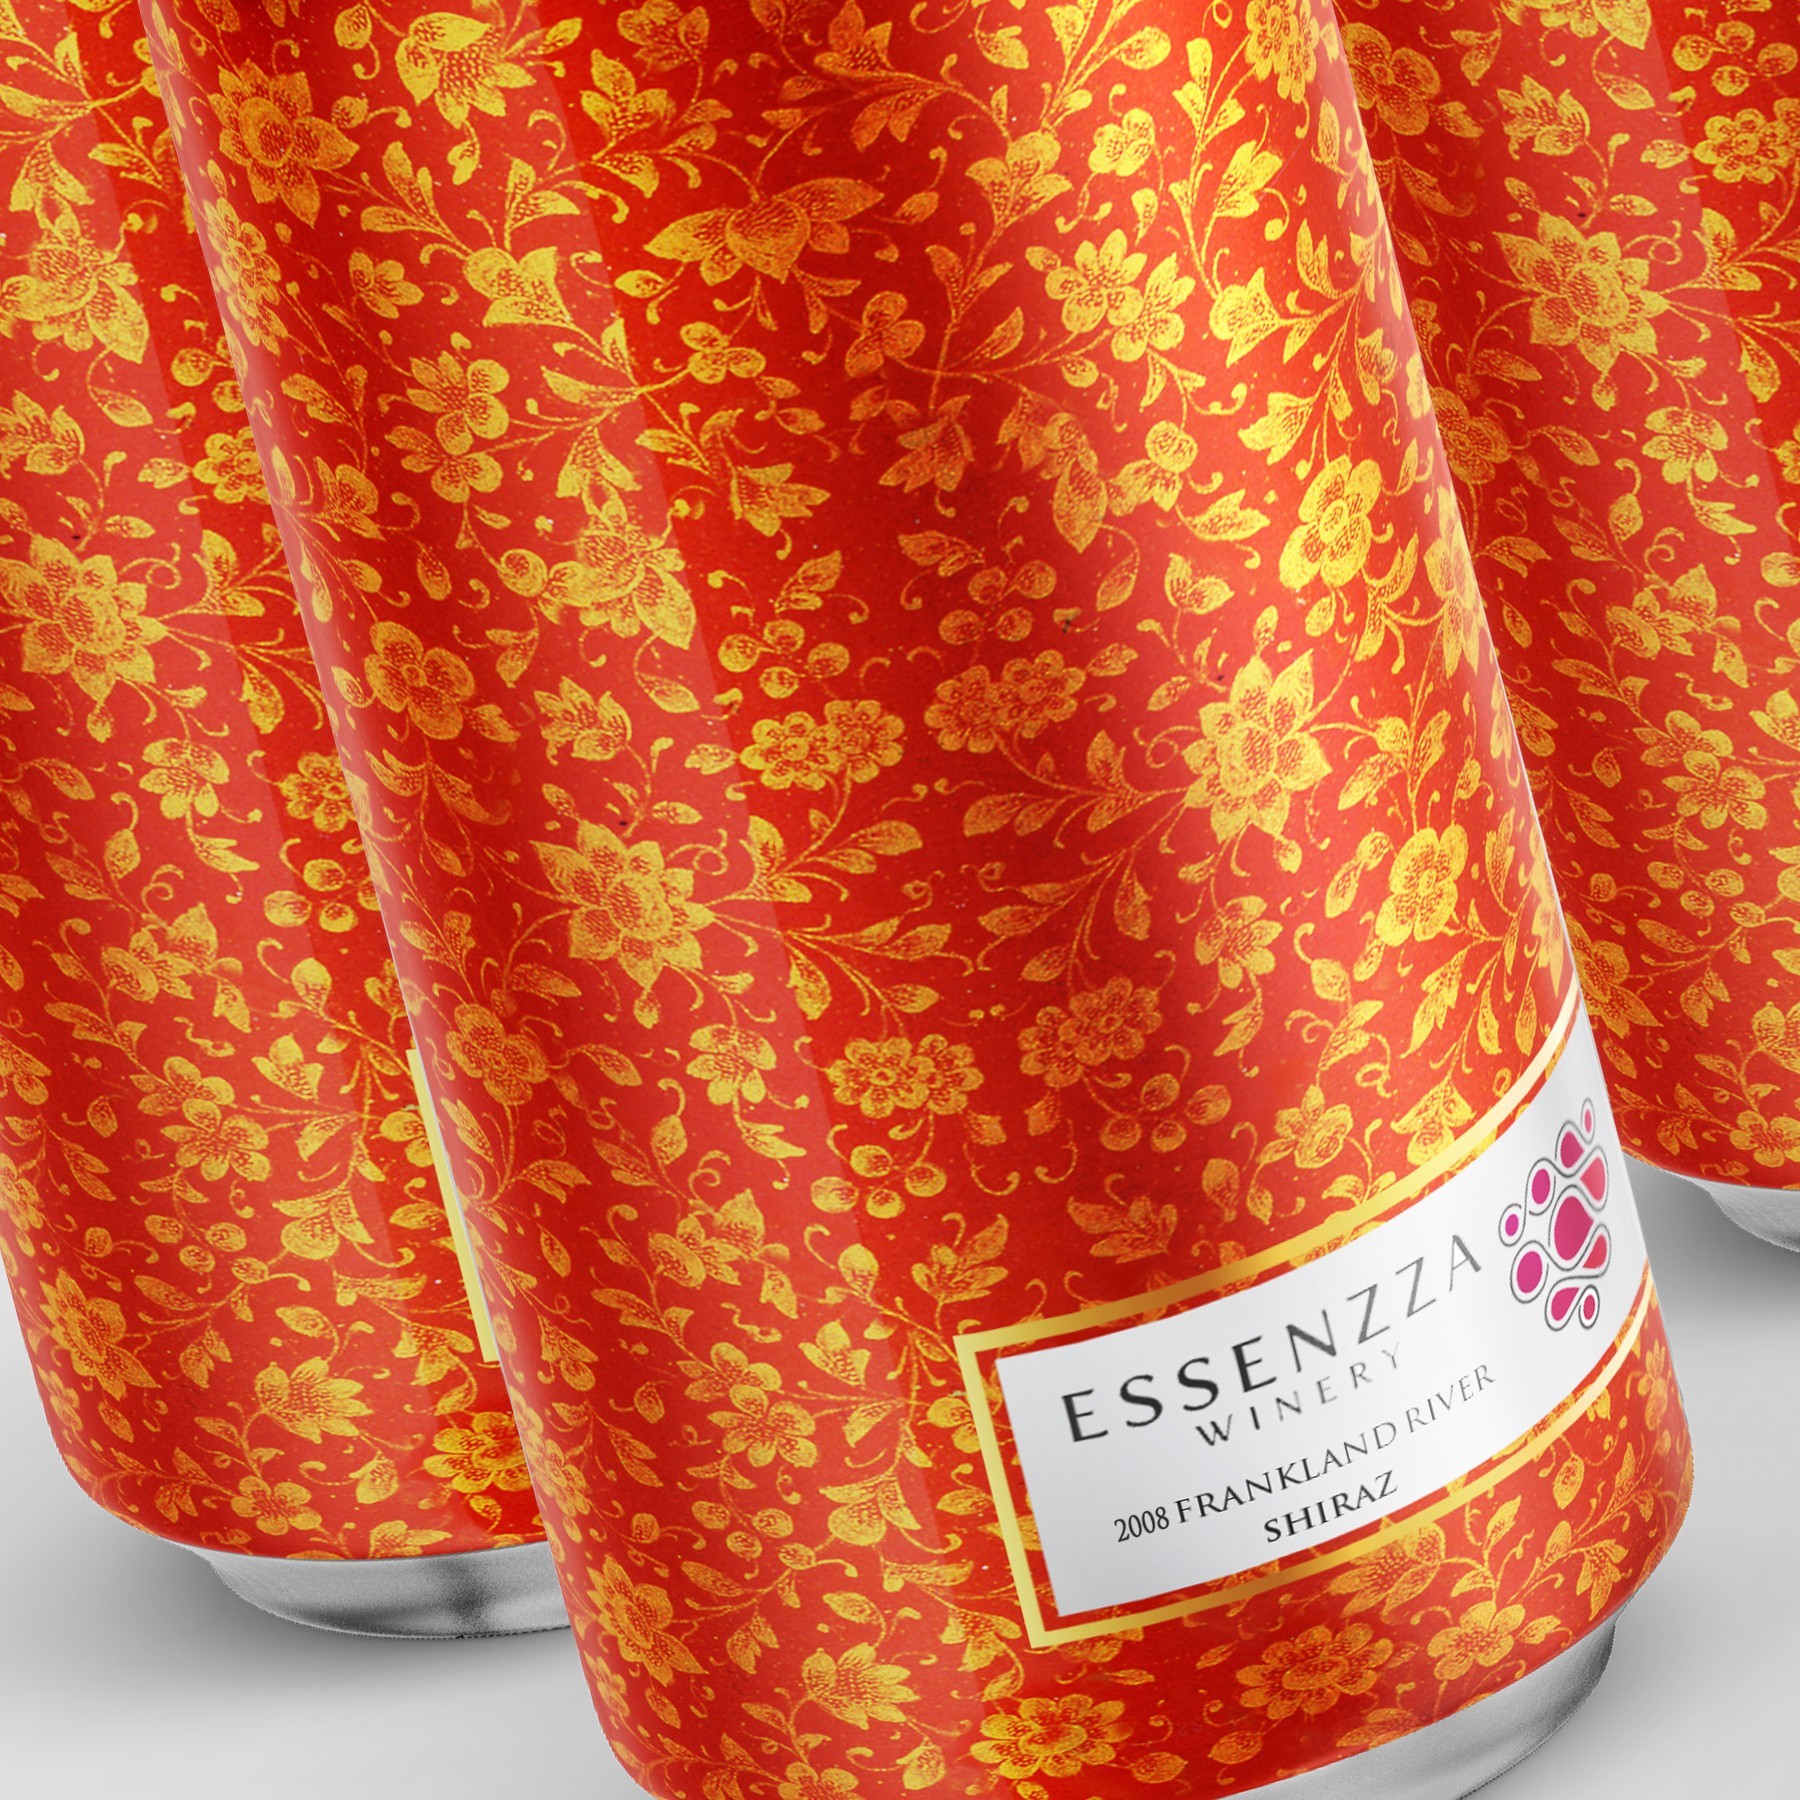 Visually Simple, and Stunning, Modern Persian Packaging Wine Design